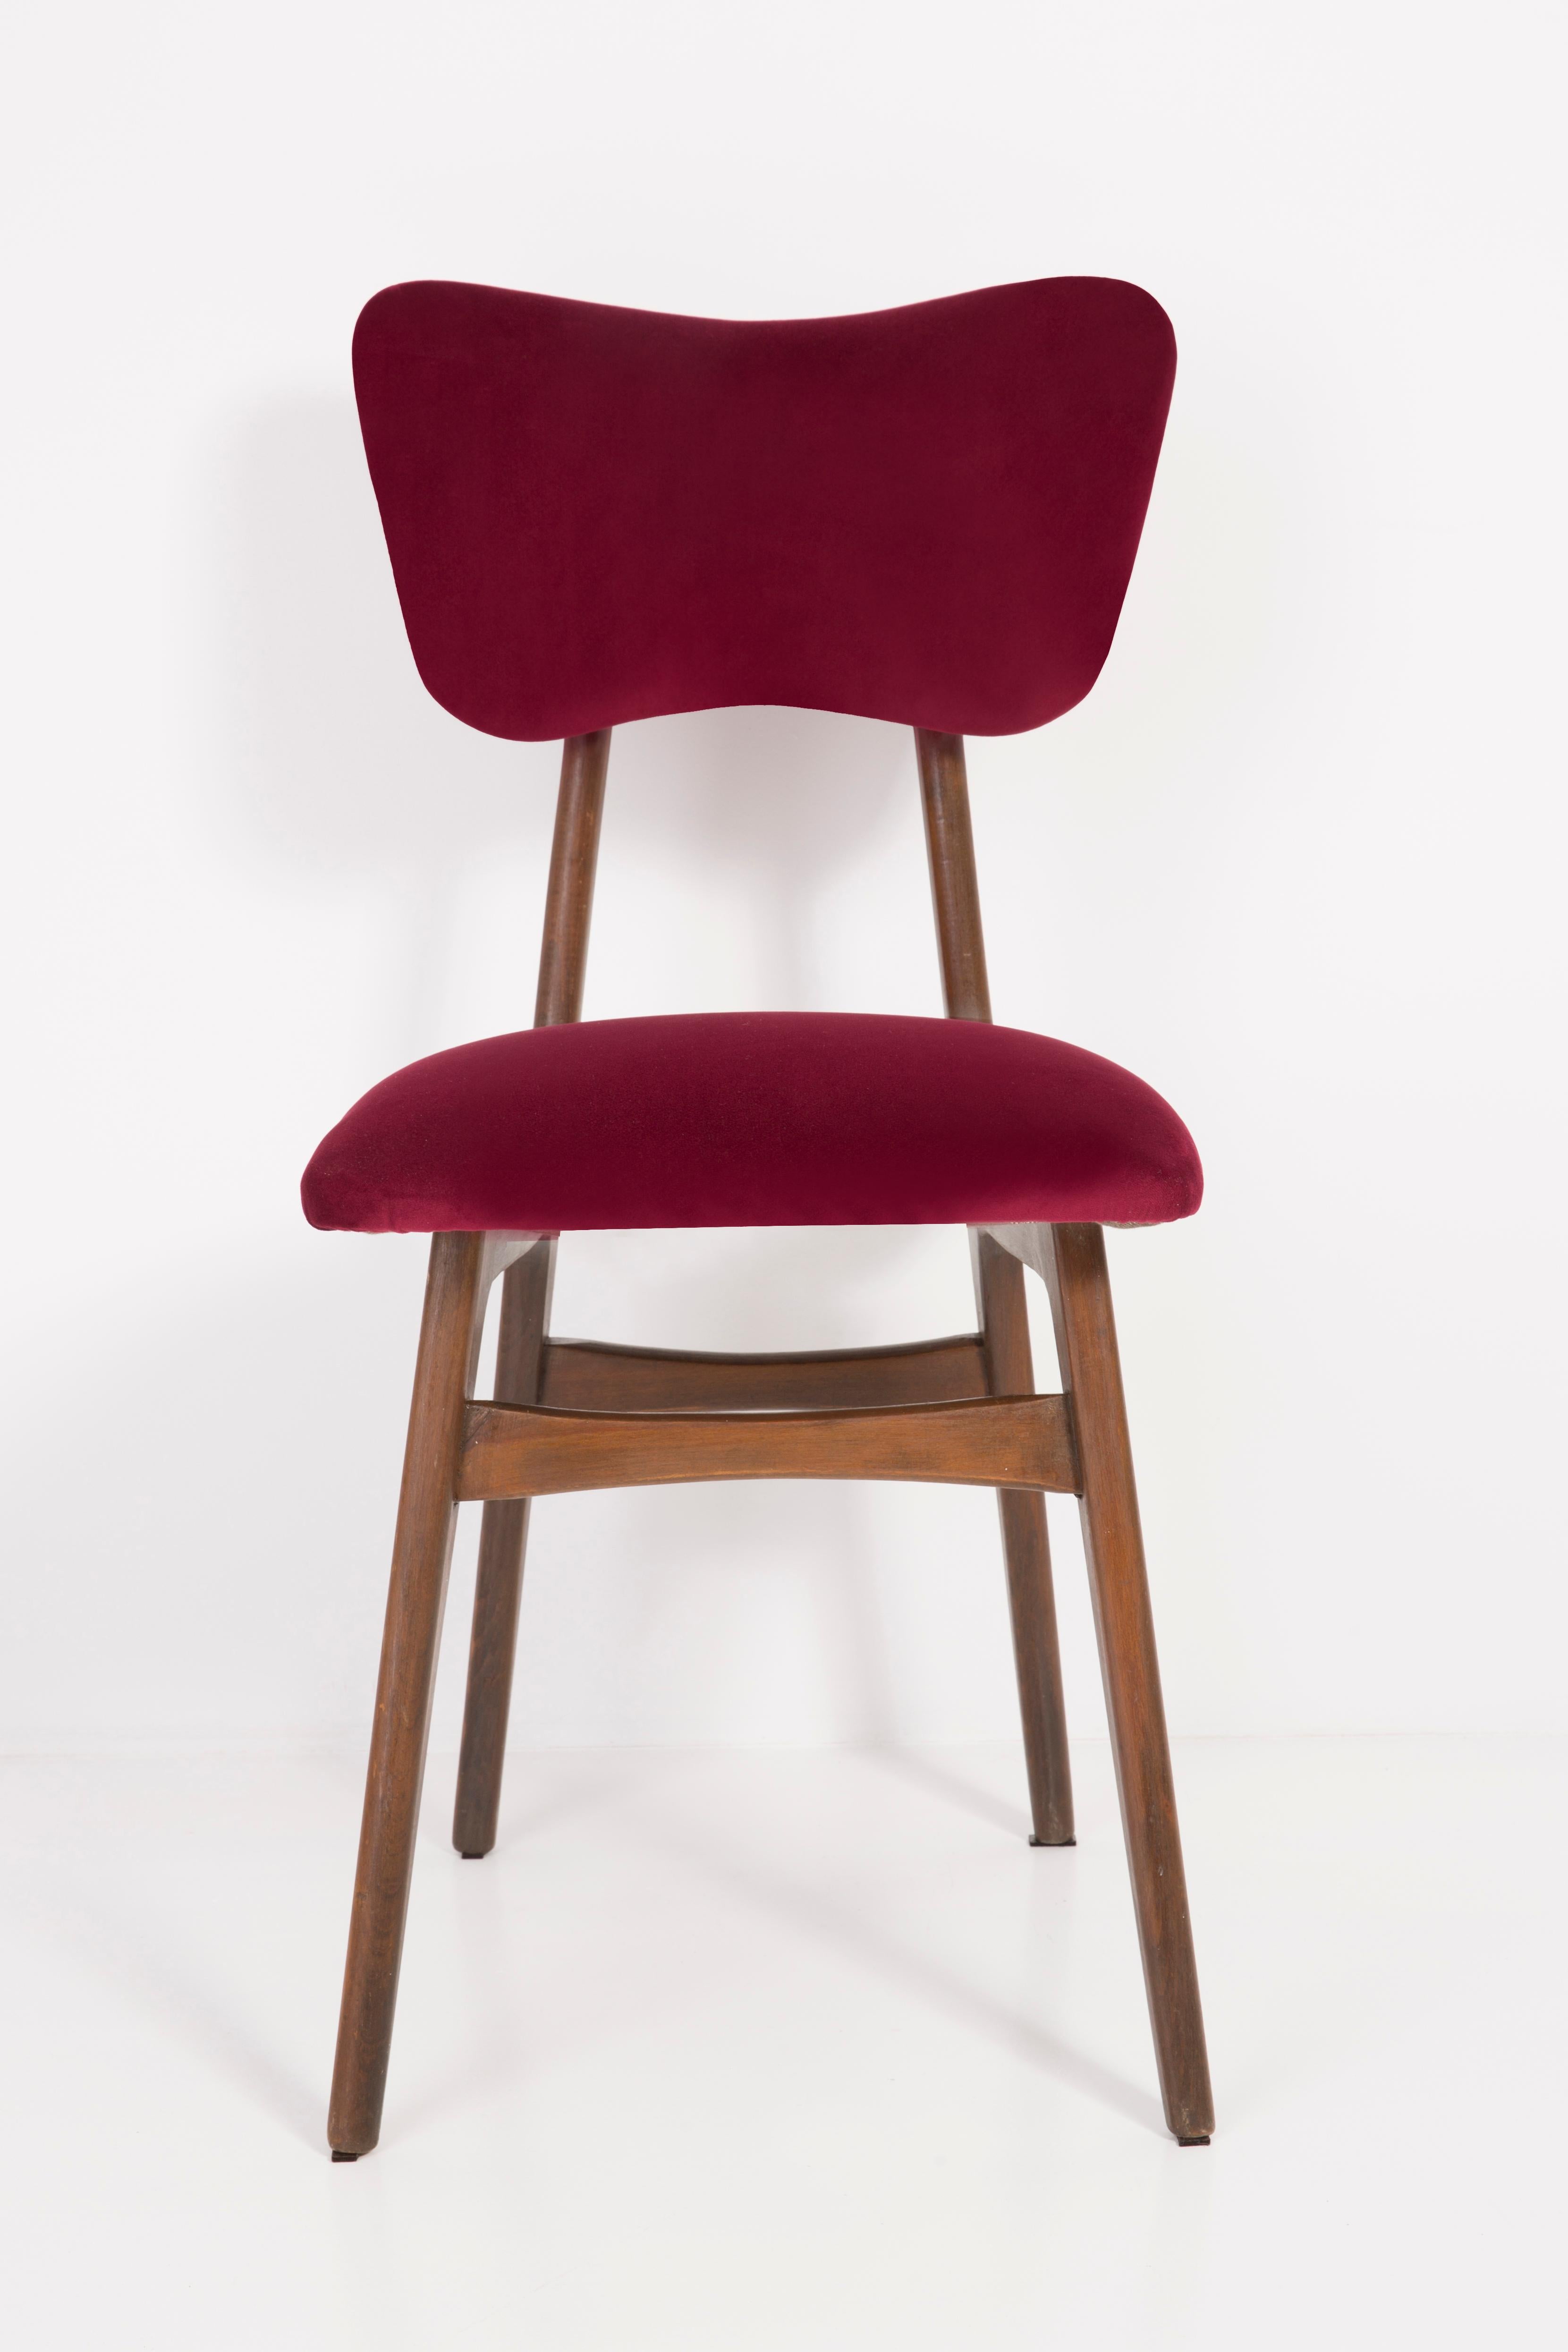 Chairs designed by Prof. Rajmund Halas. Made of beechwood. Chair is after a complete upholstery renovation, the woodwork has been refreshed. Seat and back is dressed in burgundy red, durable and pleasant to touch velvet fabric. Chair is stabile and